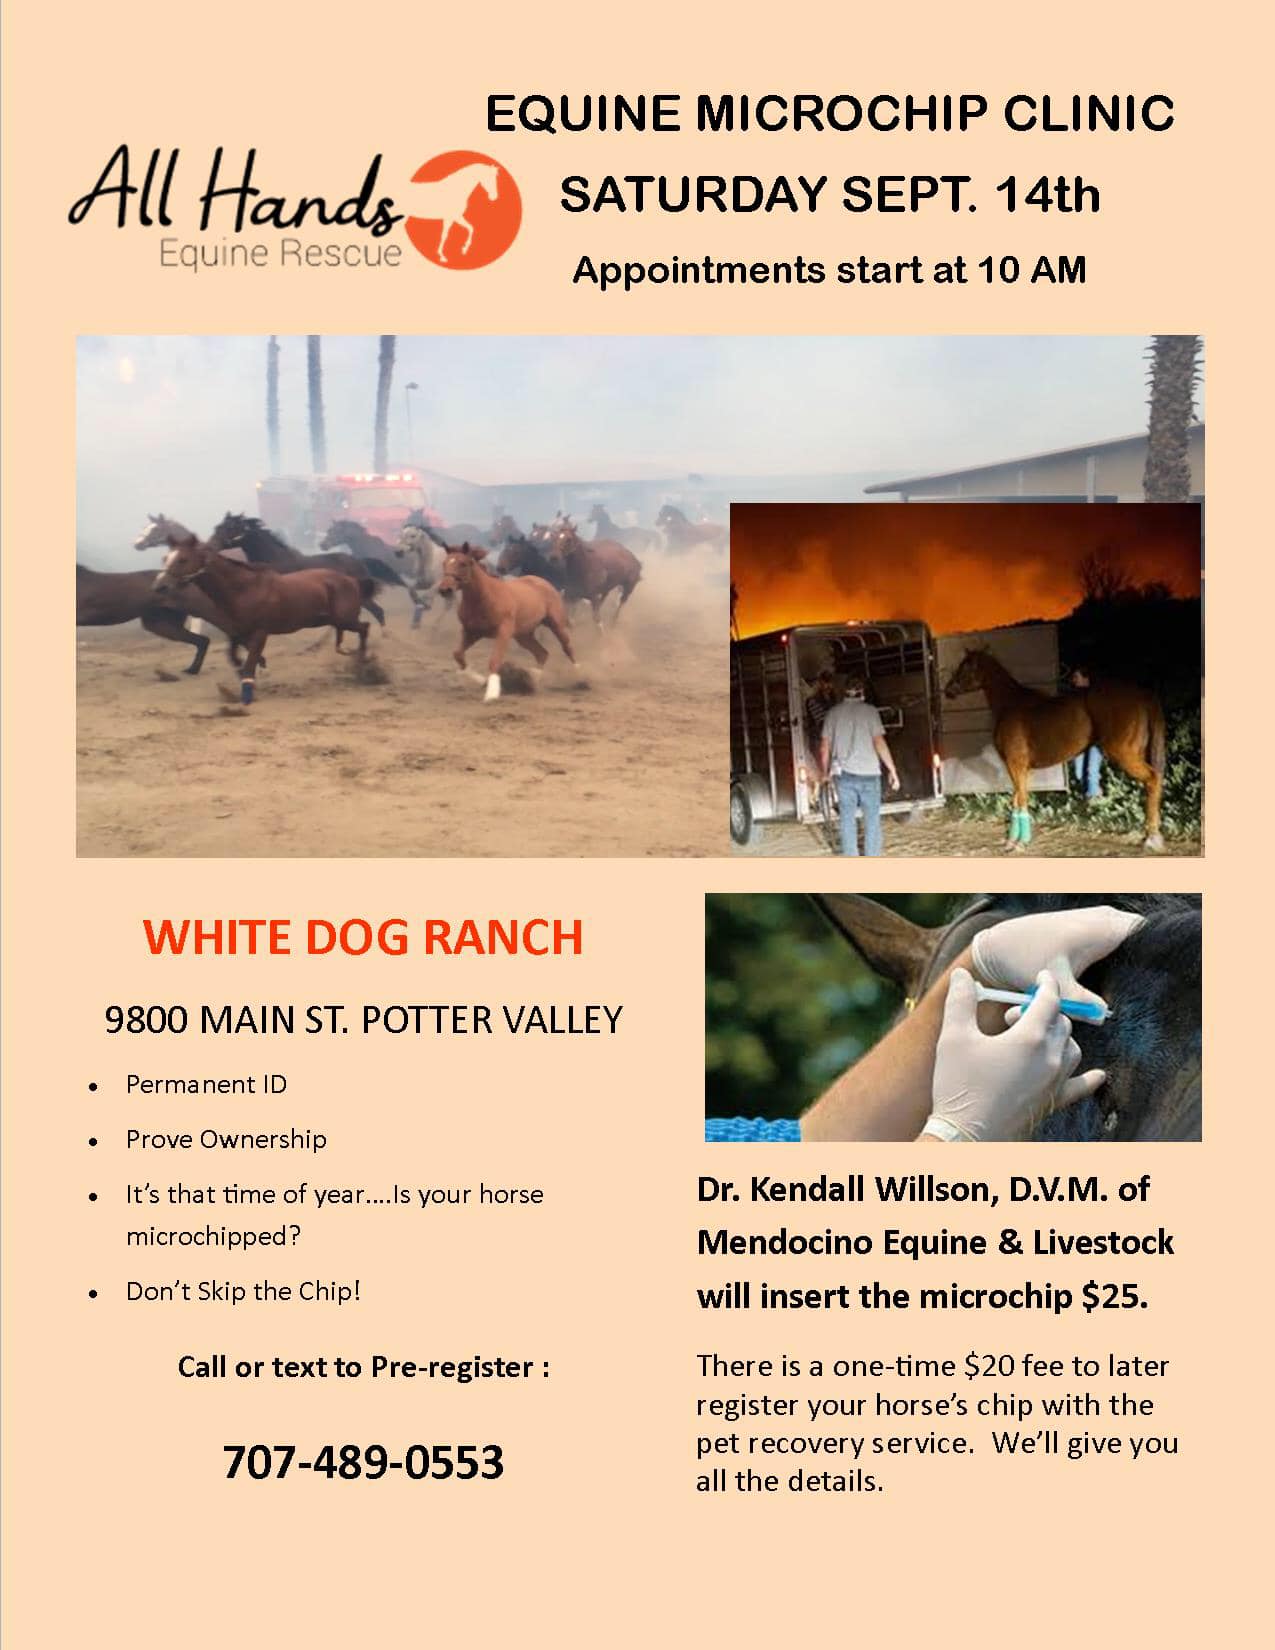 Redwood Valley Equine 8475 East Rd, Redwood Valley California 95470